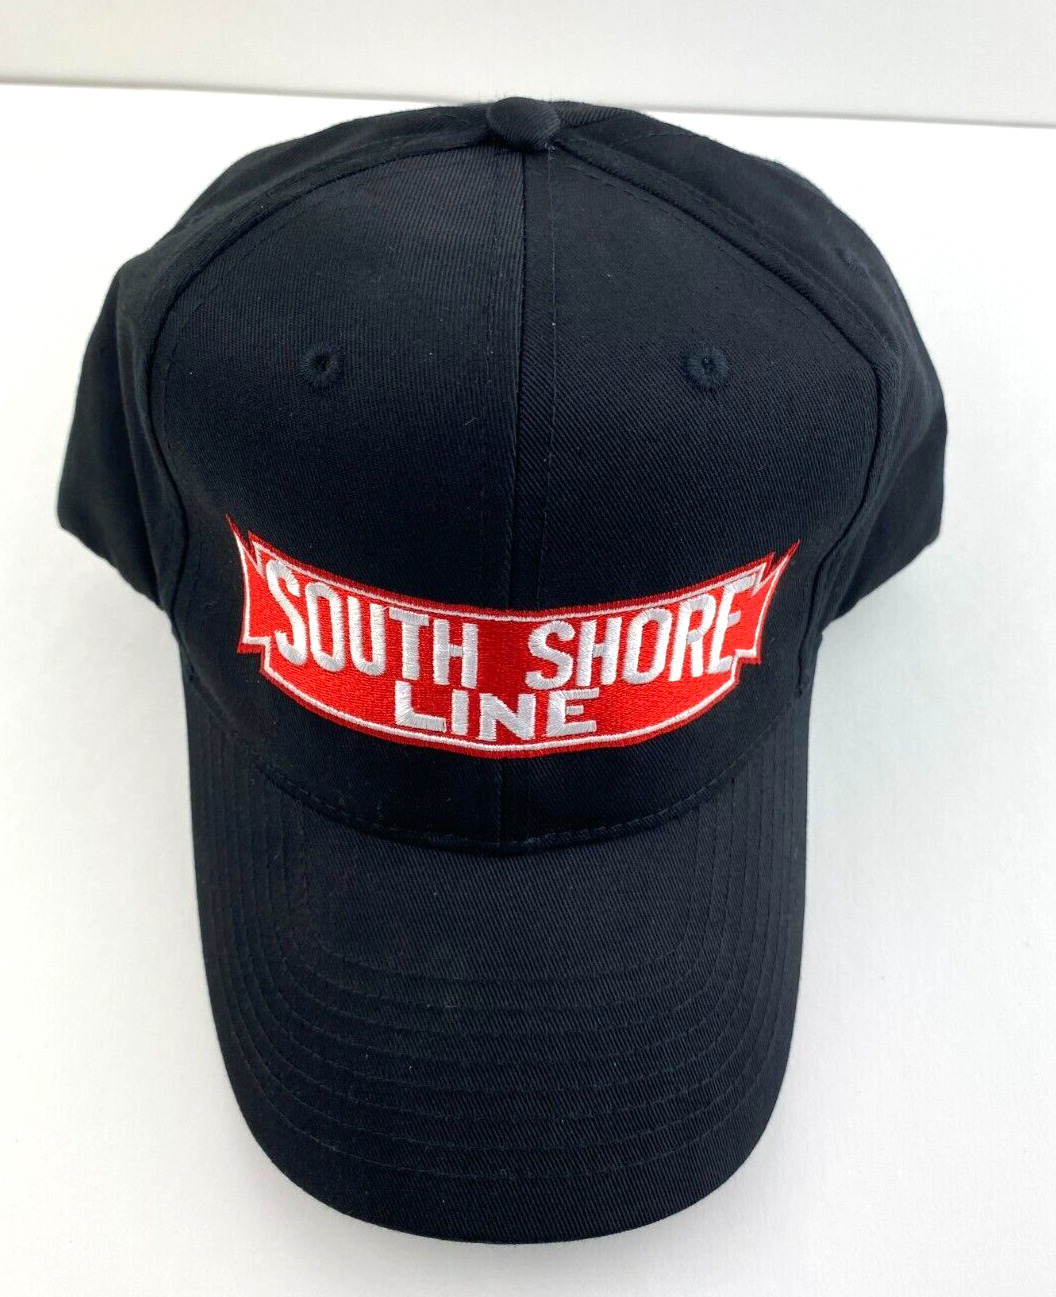 South Shore Line Embroidered Cap Hat - Snapback - Railroad - Trains